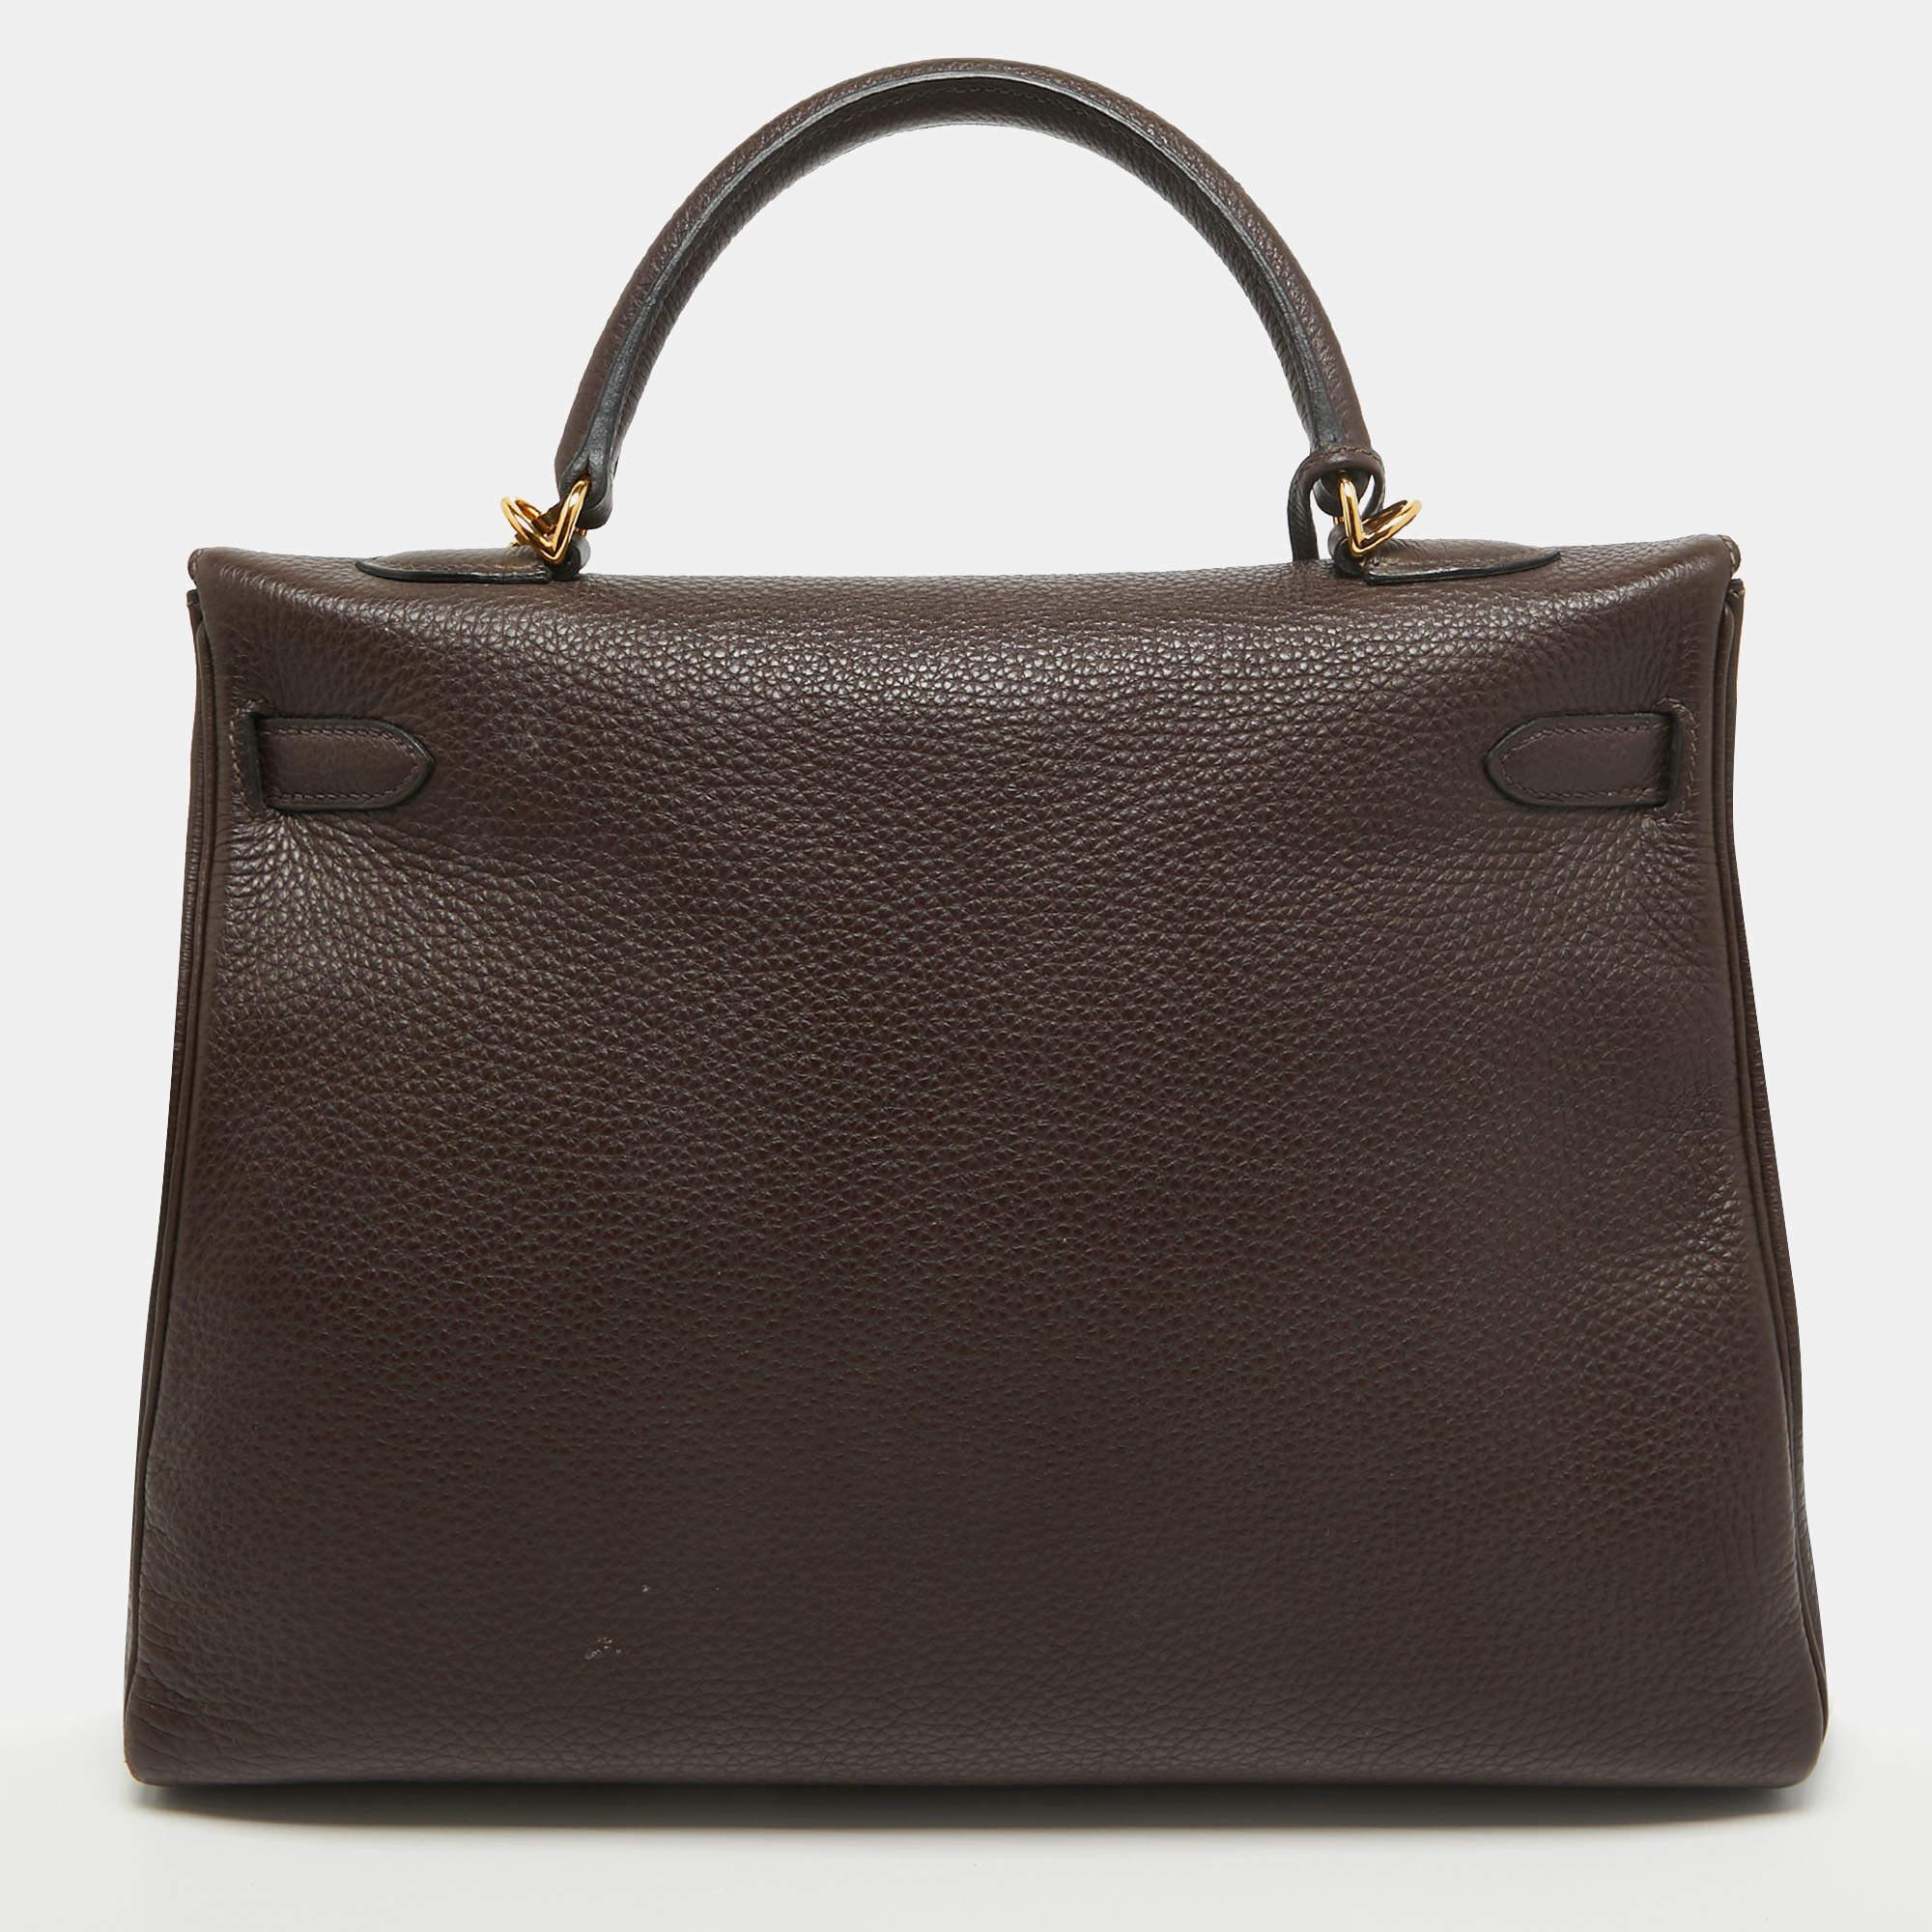 The Hermes Kelly is beautiful as it is carefully hand-stitched to perfection. This Kelly Retourne is crafted from Togo leather and has gold-finish hardware. Retourne has a more casual look and is stitched on the inside thus making its edges softer.